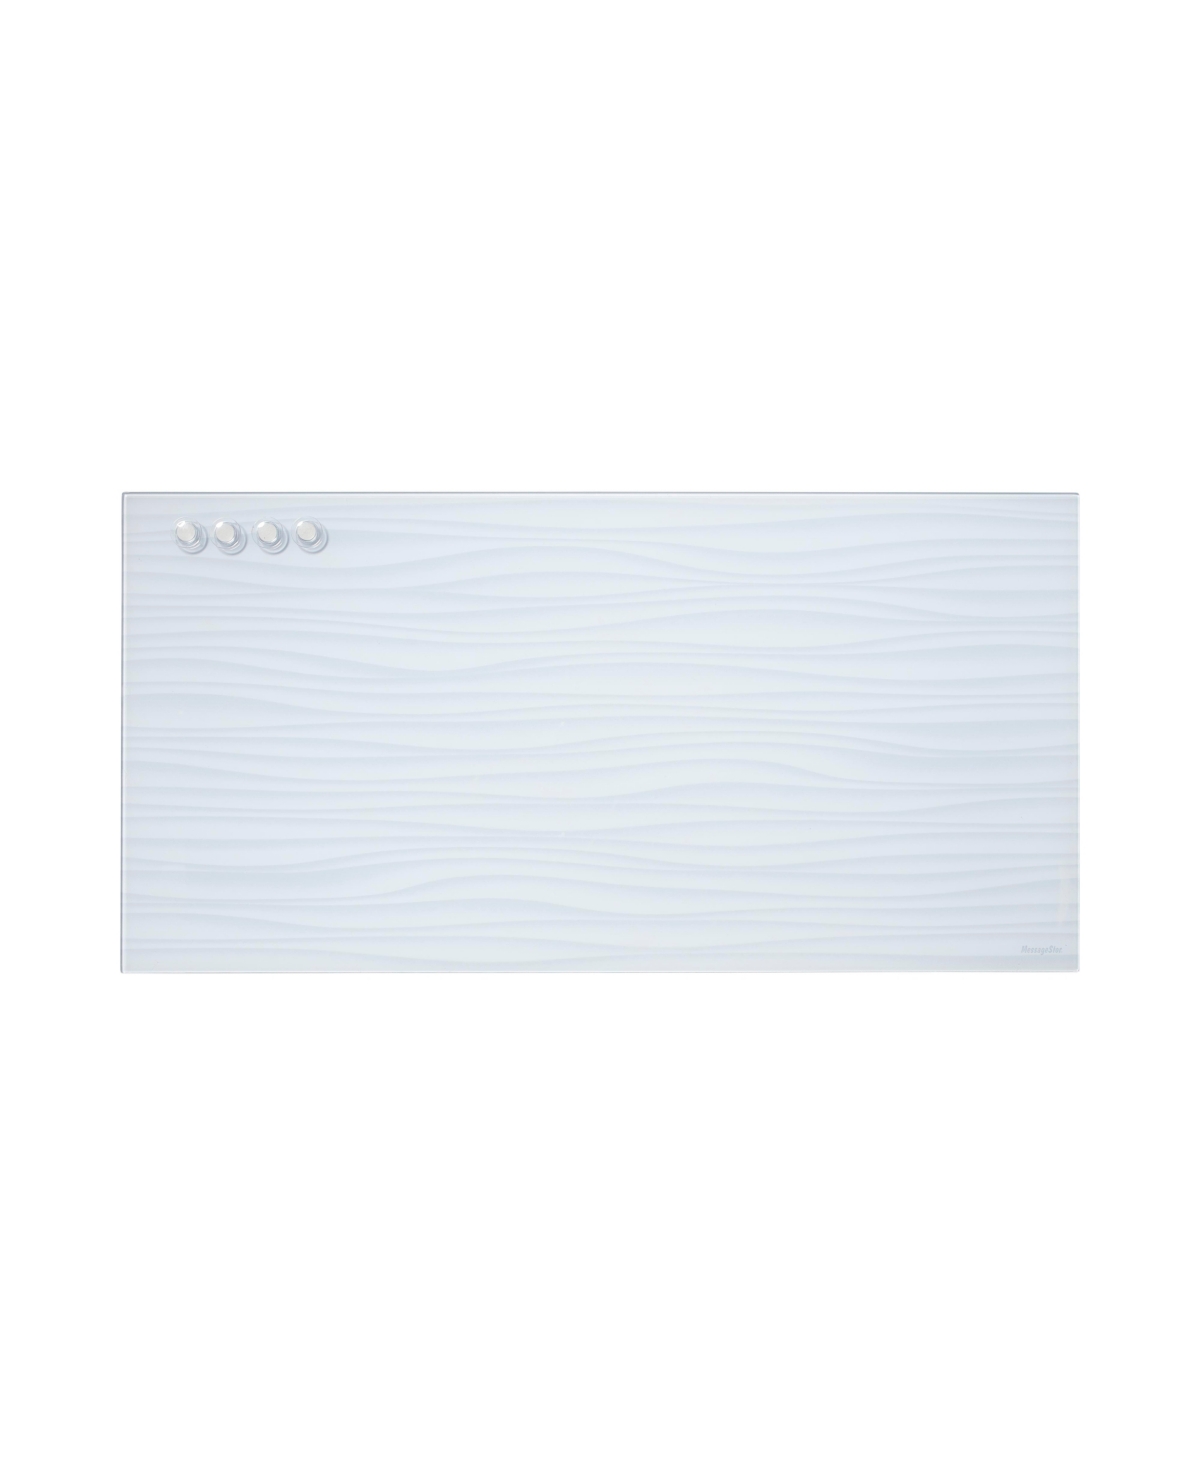 MessageStor Magnetic Dry-Erase Glass Board with Magnets, 18in x 36in, White Brick - Botanical